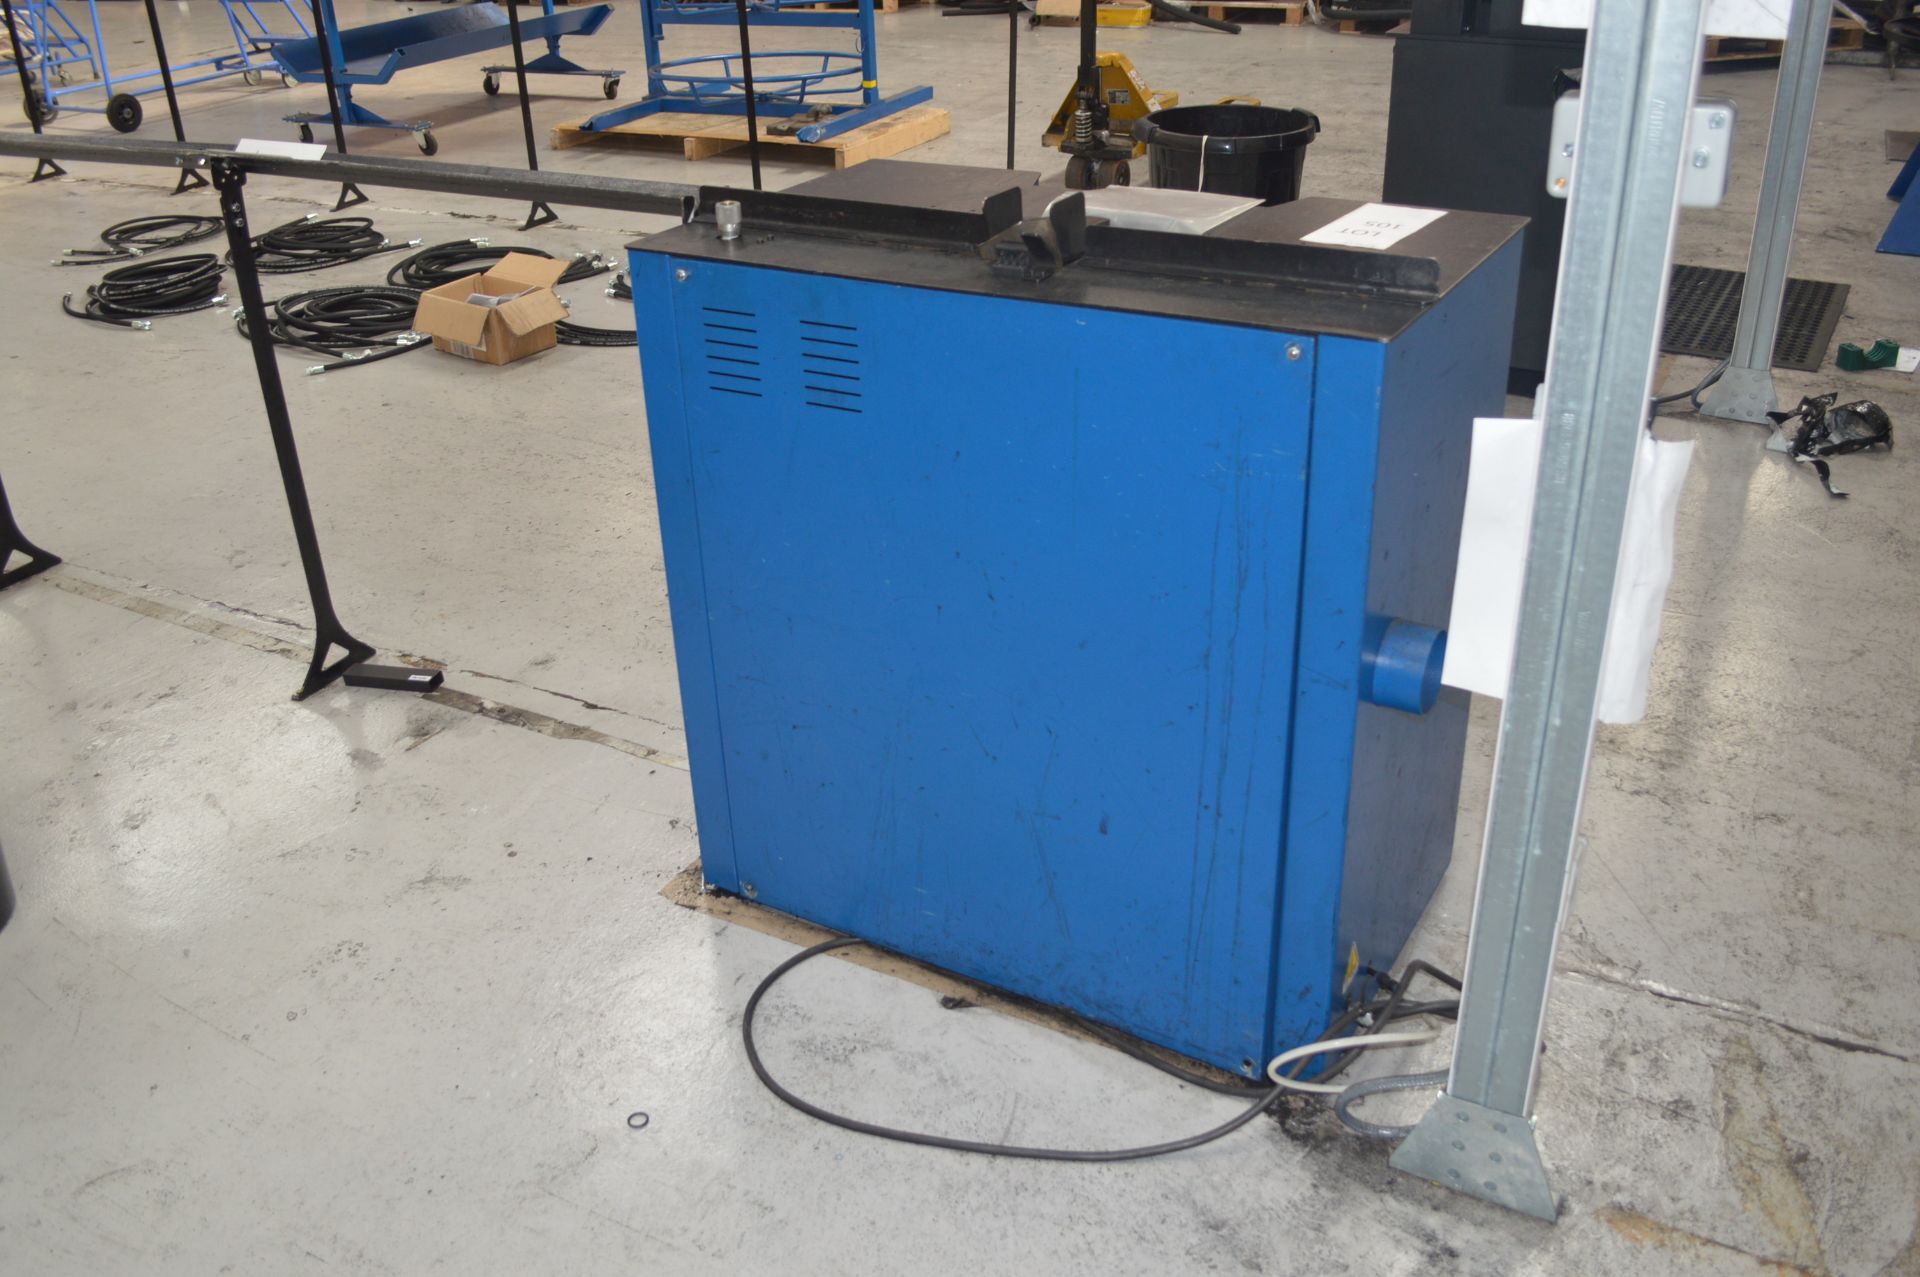 B Fluid Cut 535P Hose Cutting Machine Serial No: 00145 (2013) (Please Note: Items Located in - Image 4 of 5